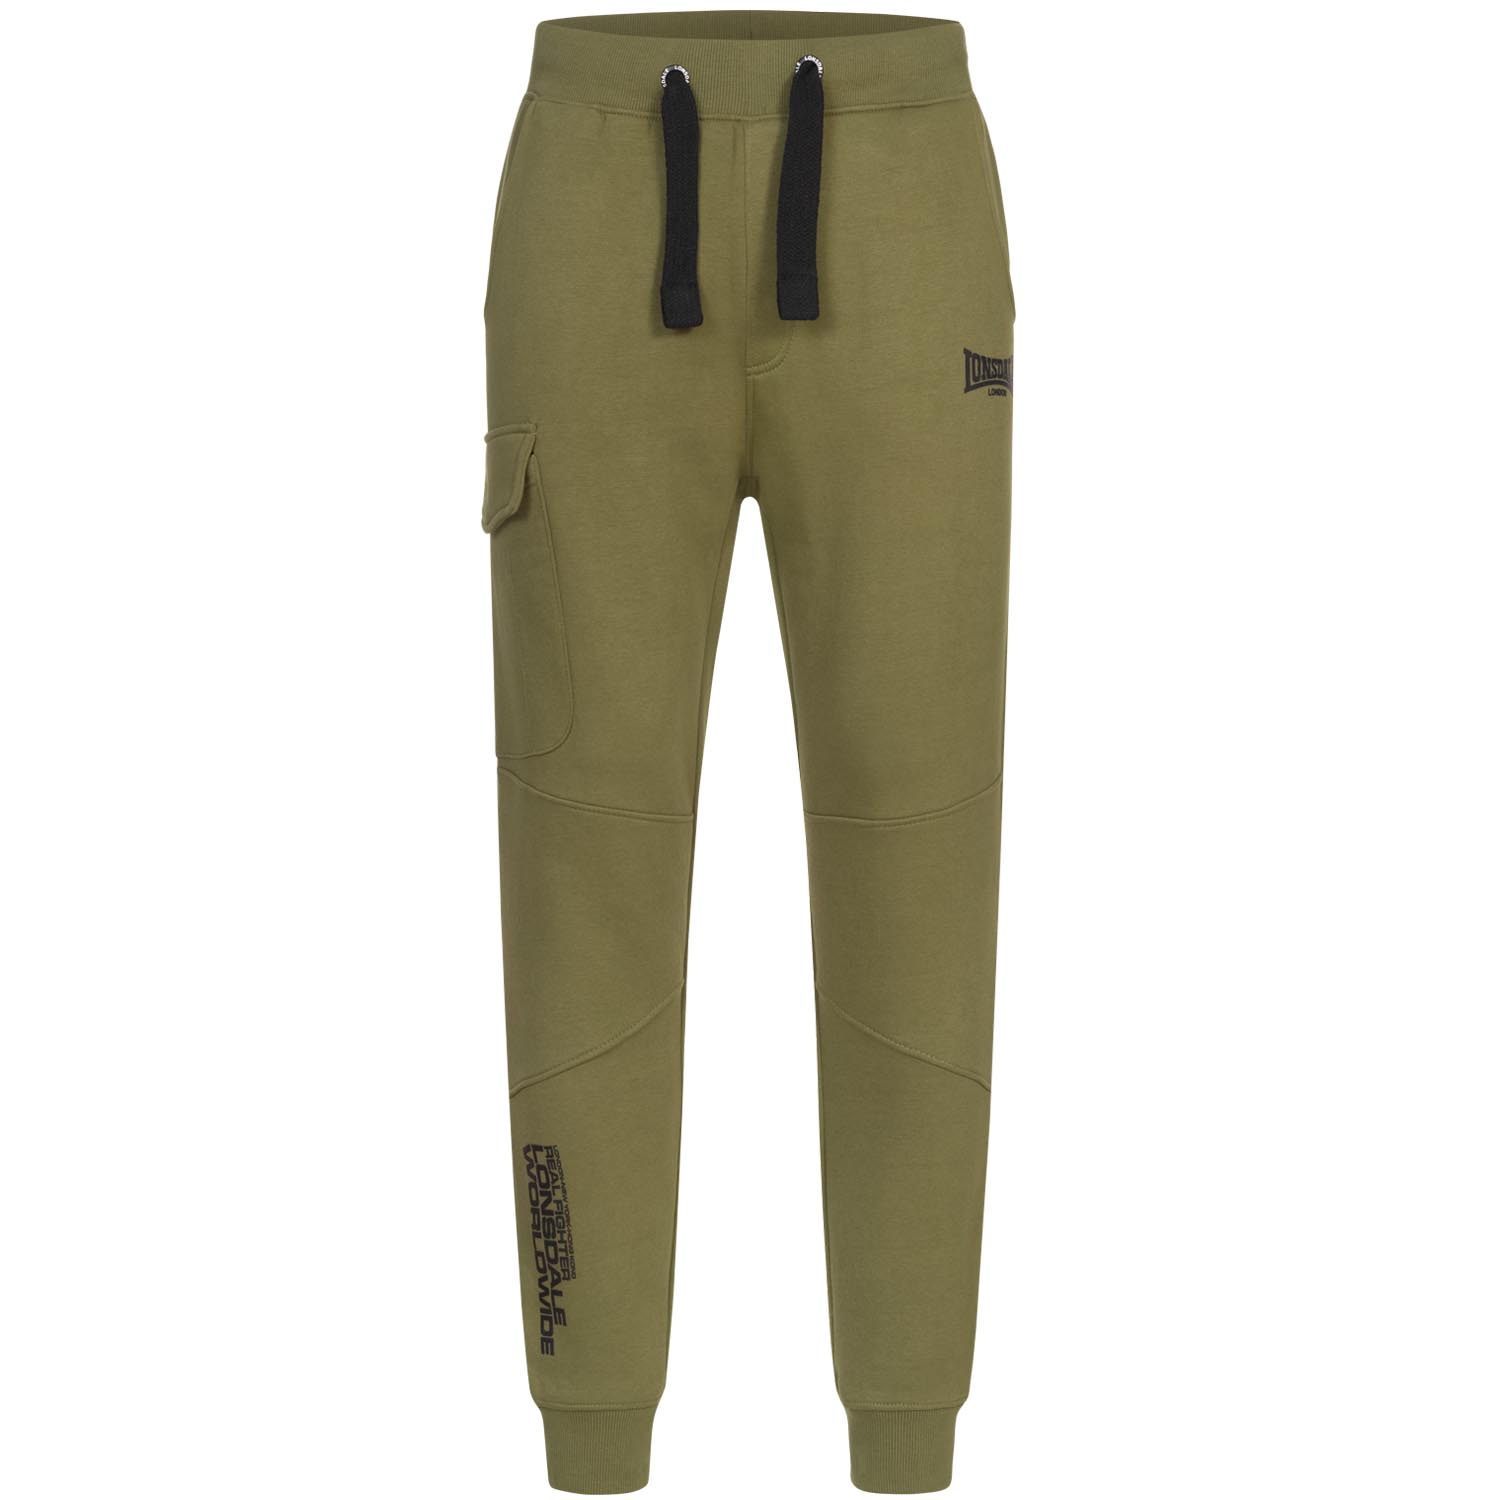 Lonsdale Joggers, Tweedmouth, olive